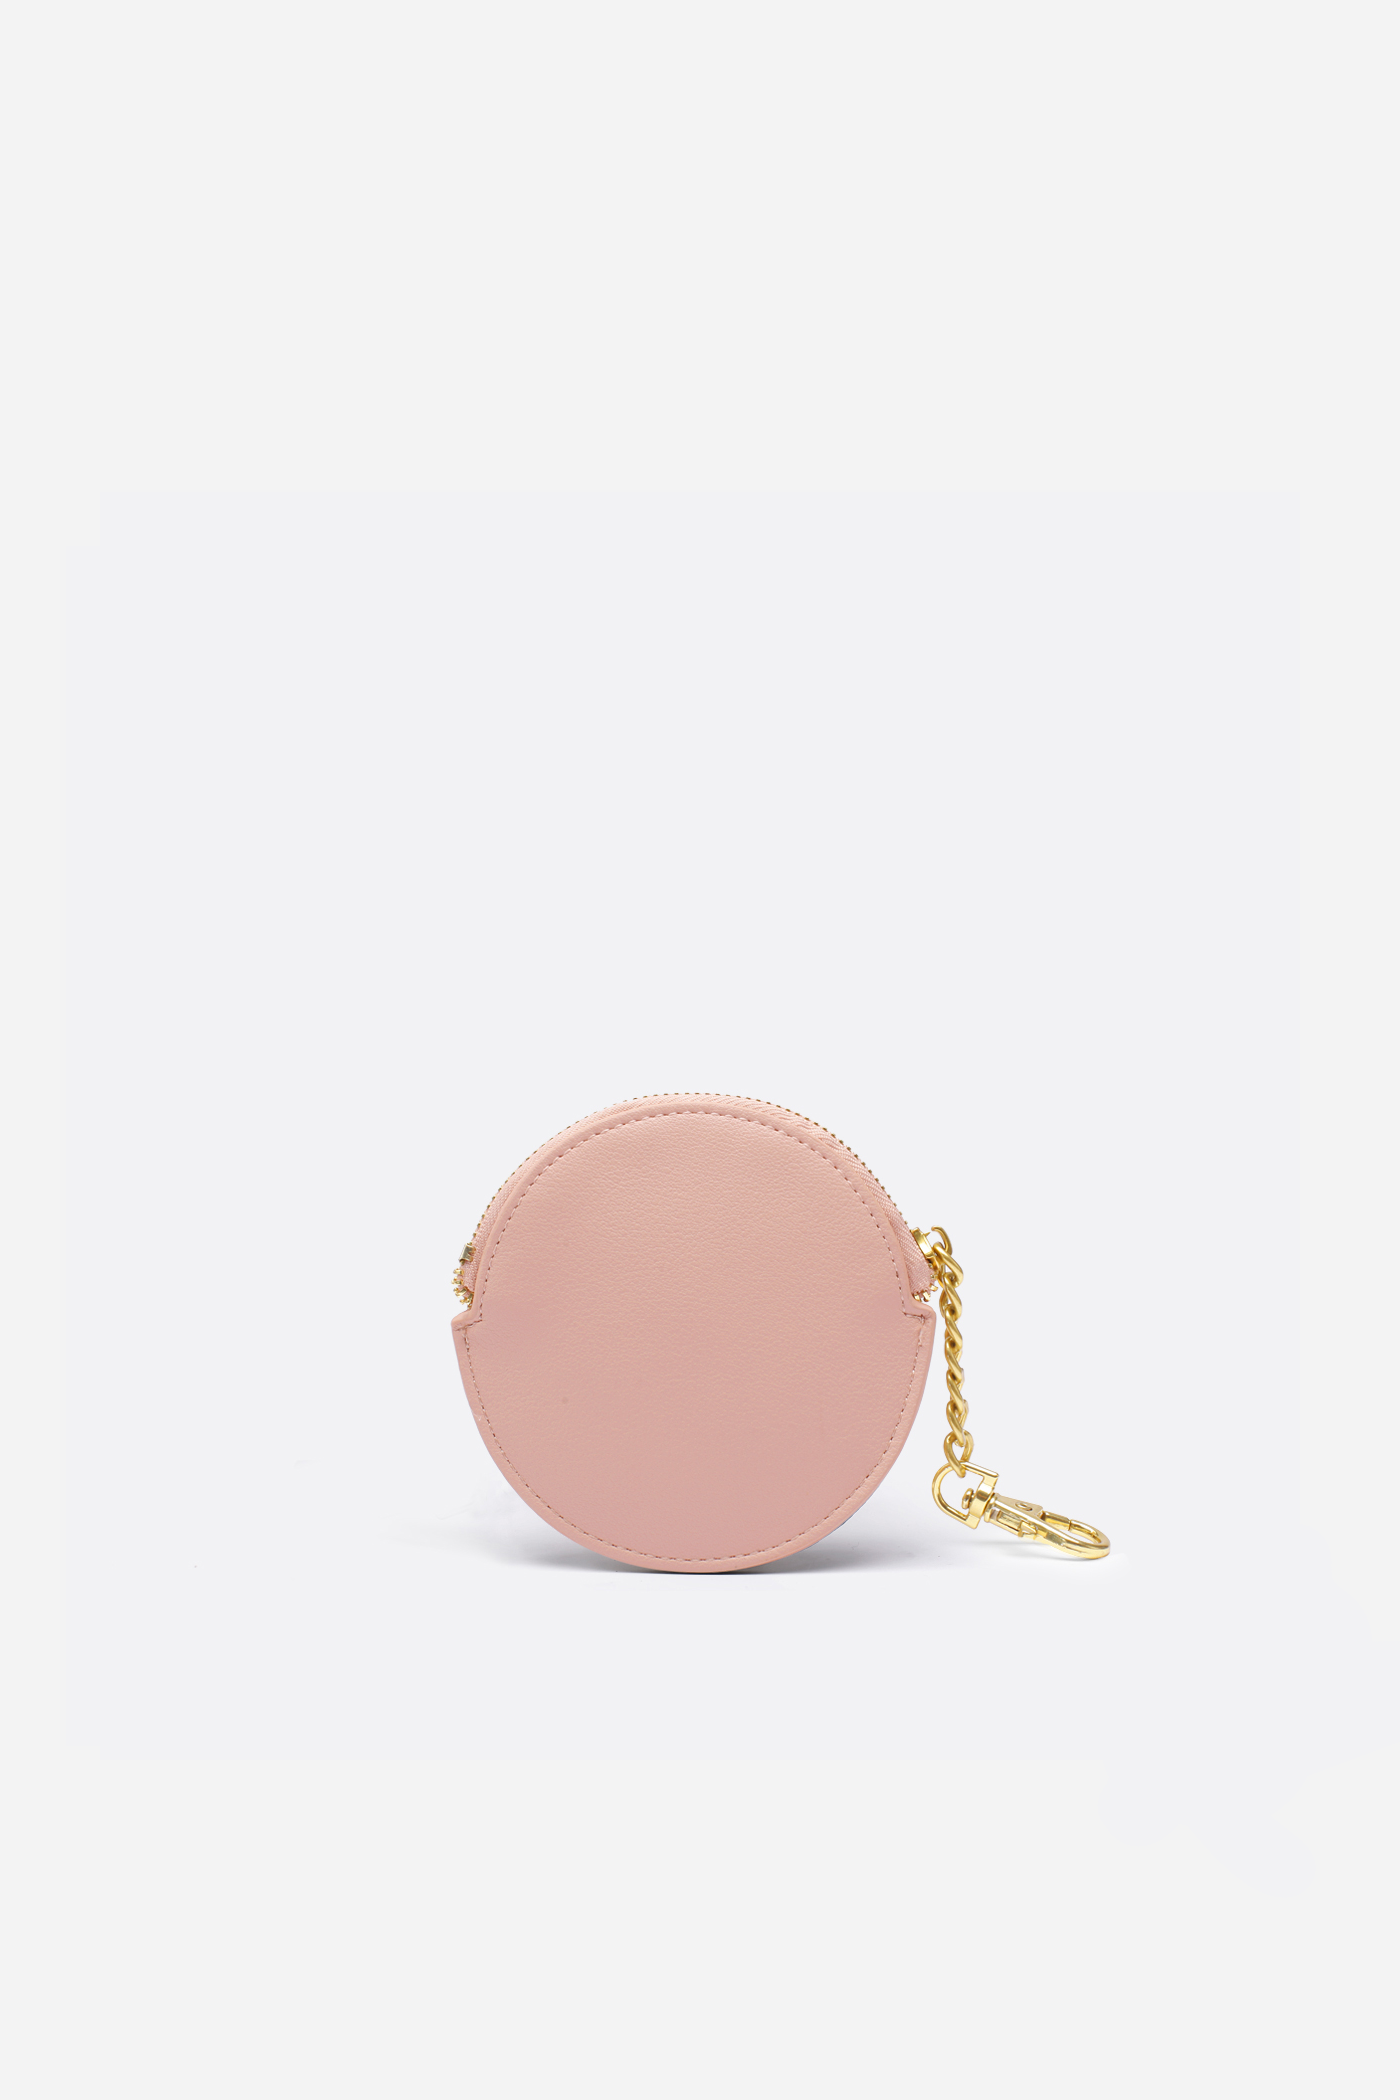 Pixie Mood Monica Pouch in Rose Croc